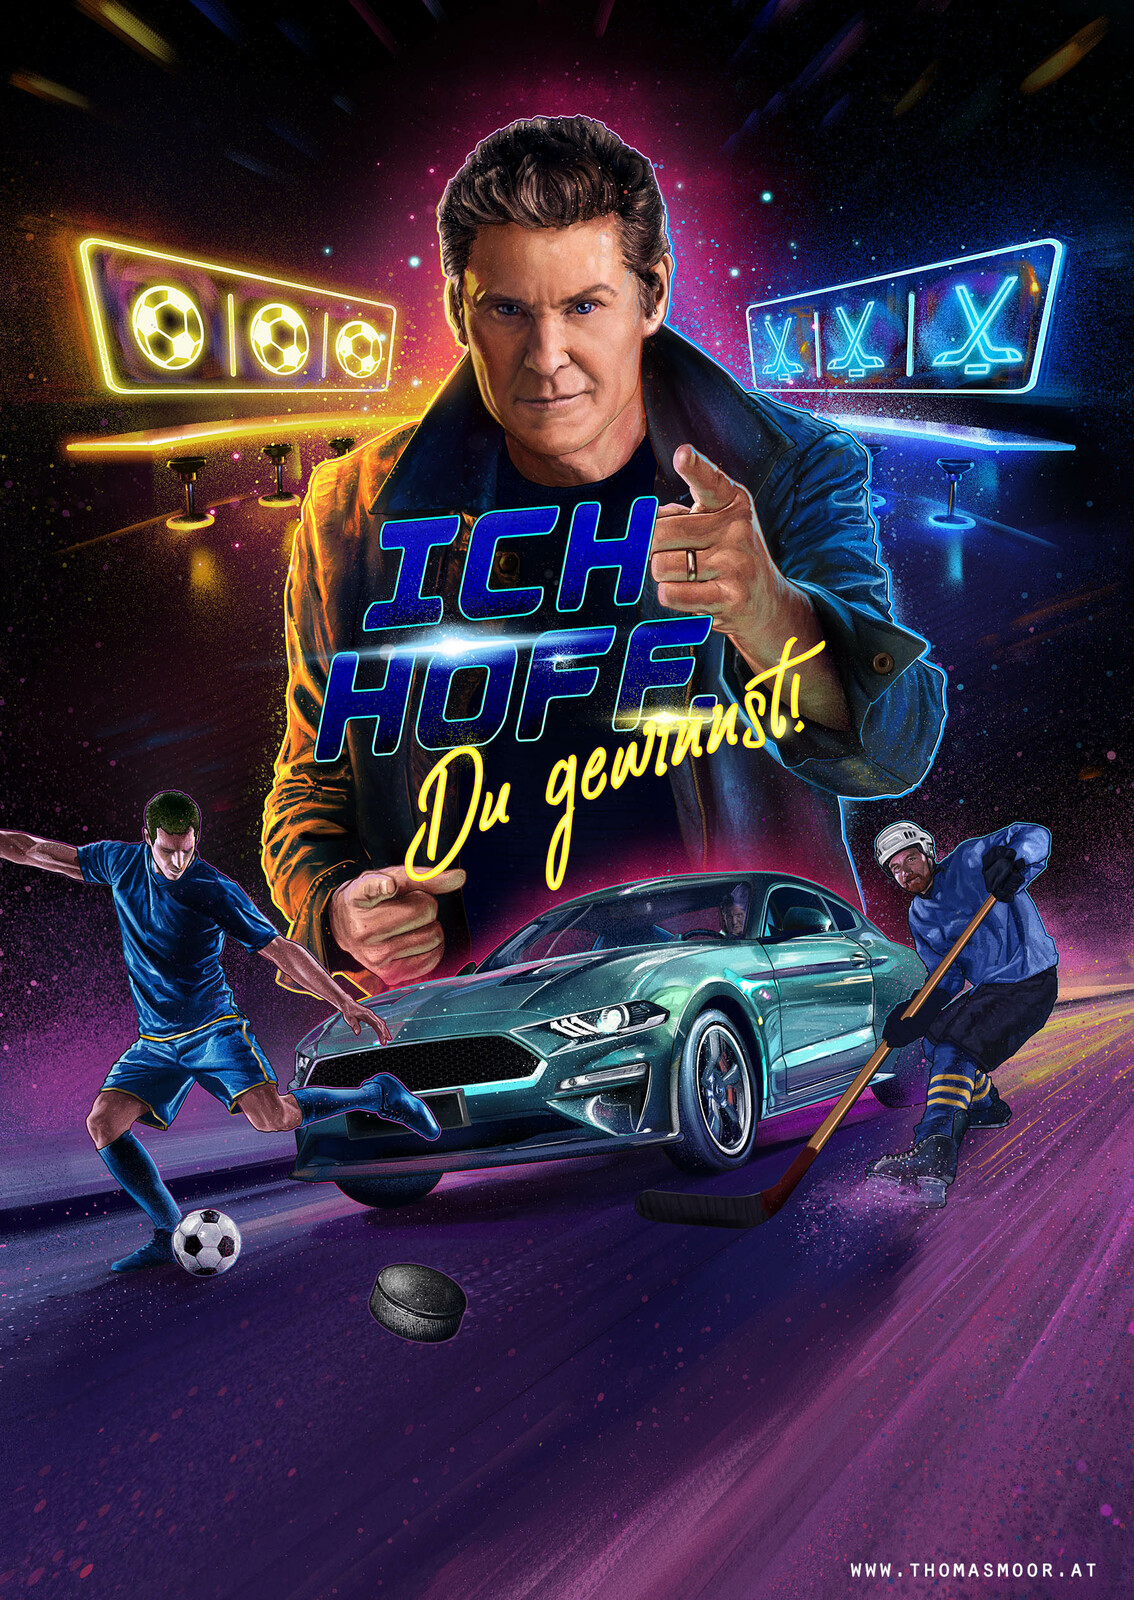 this is the version the client went for, with a slightly younger Hoff